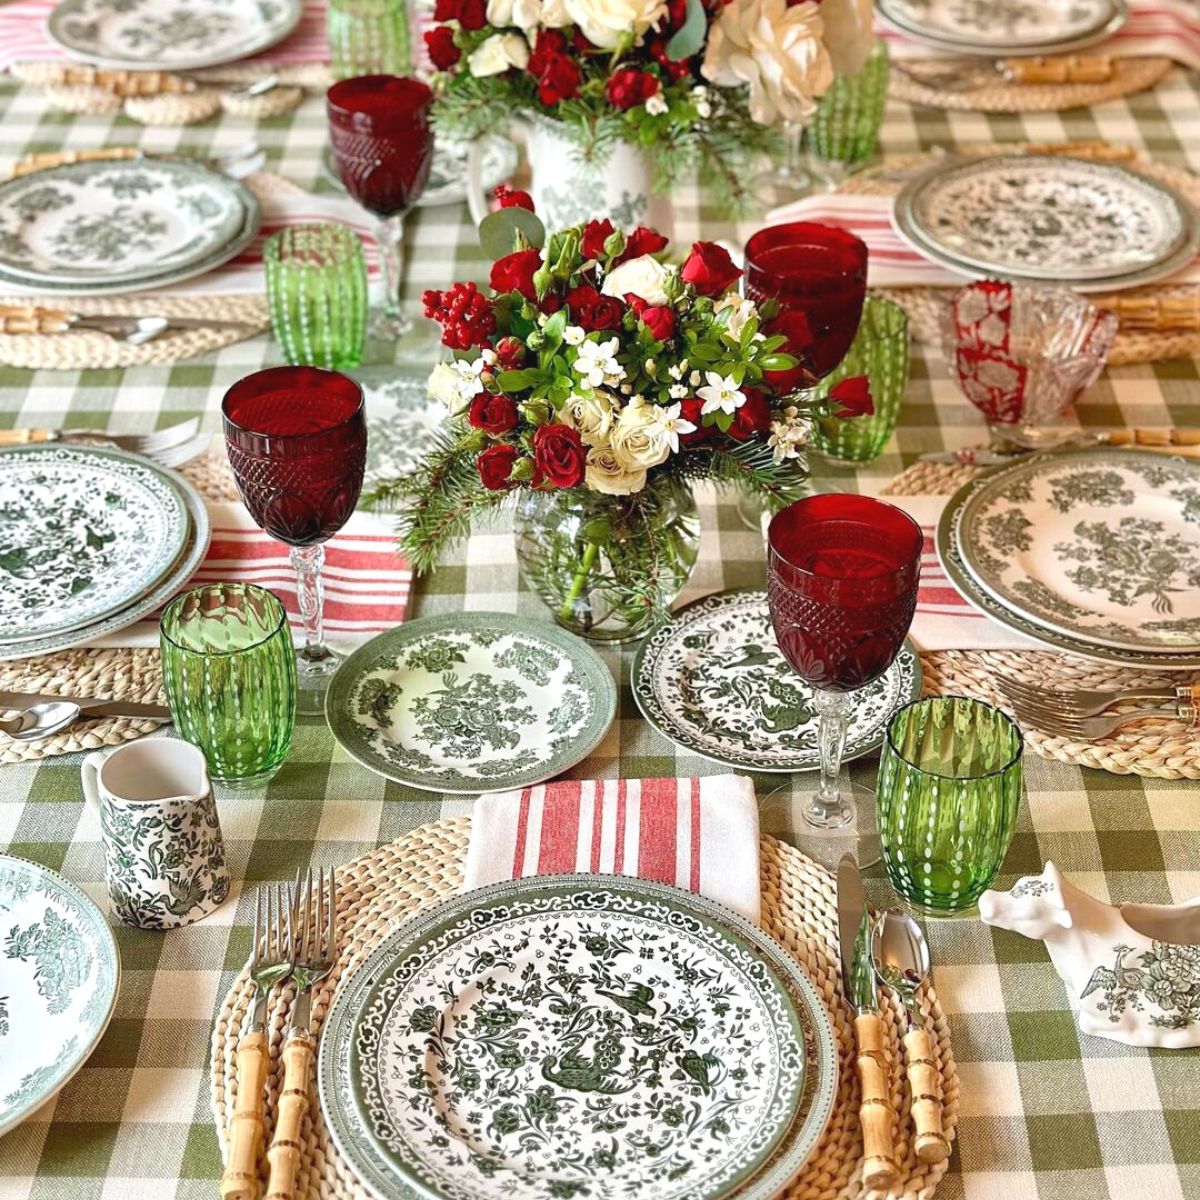 A tiny Christmas floral design for the table center